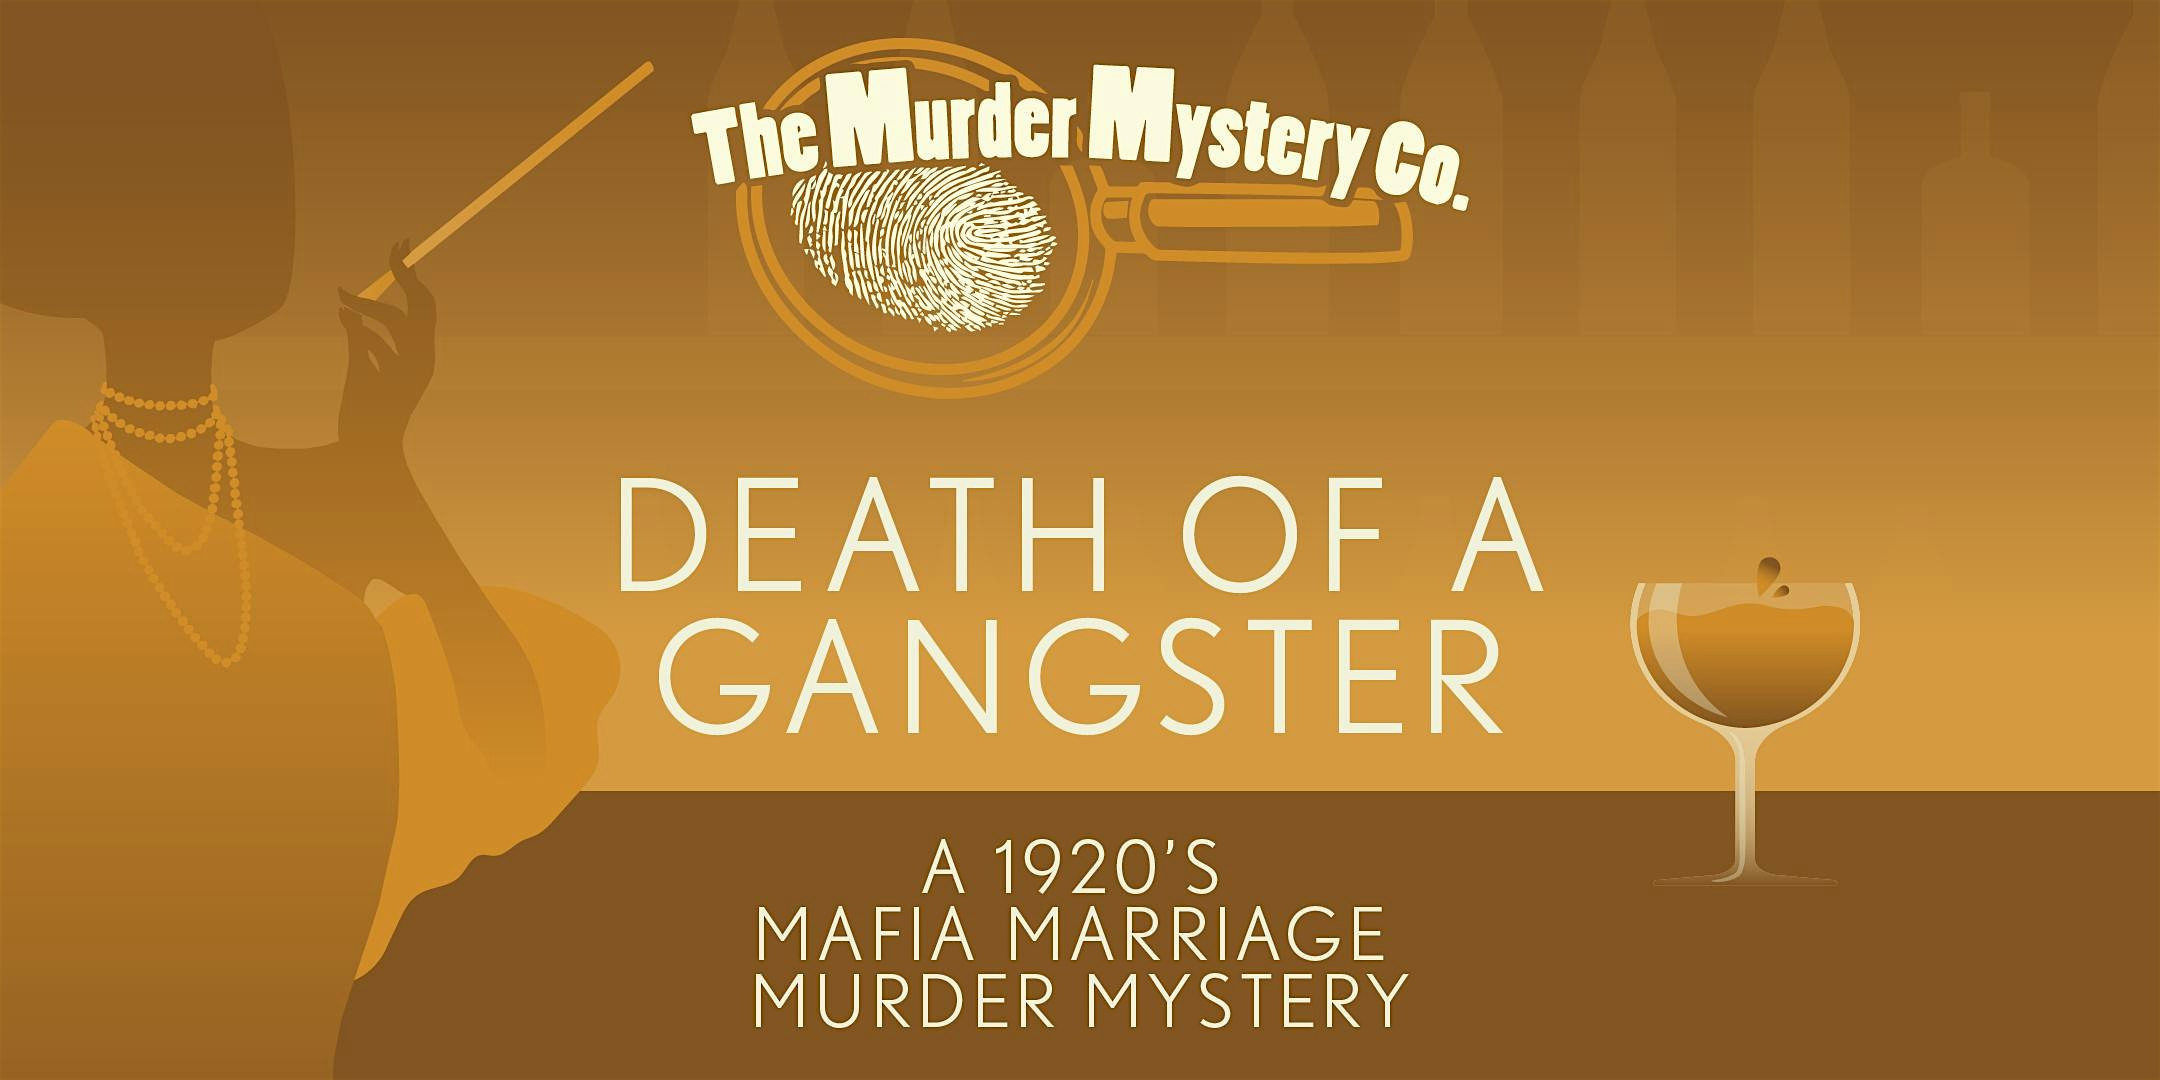 Murder Mystery Dinner Theater Show in Seattle: Death of a Gangster